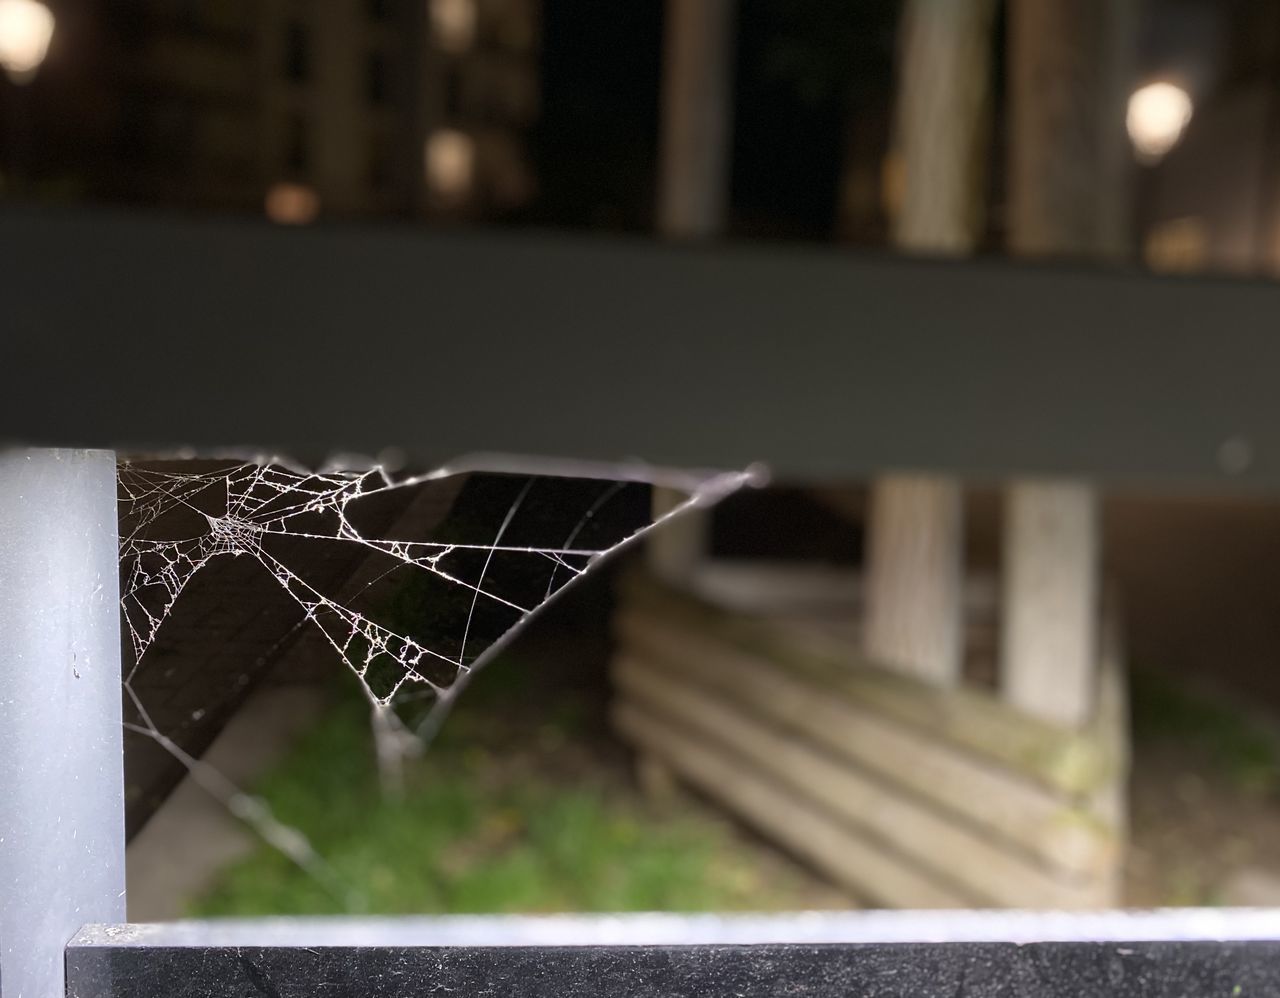 focus on foreground, light, no people, architecture, black, lighting, close-up, outdoors, nature, white, built structure, day, iron, spider web, fence